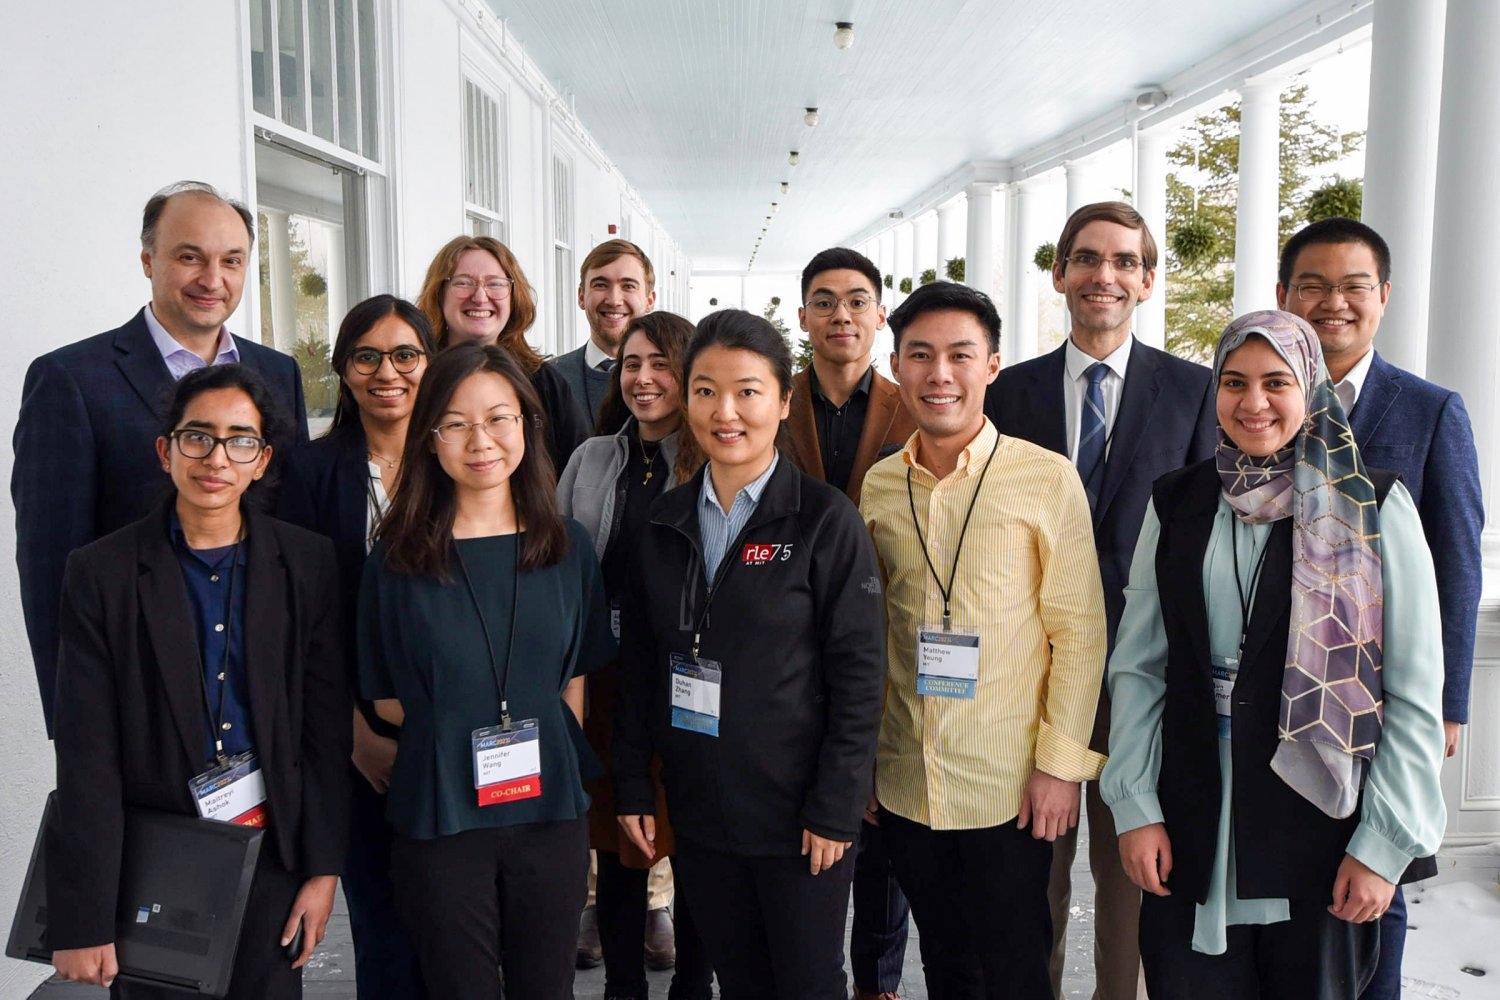 2023 marked the 19th year for the student-led Microsystems Annual Research Conference. Pictured is the 2023 graduate student committee with faculty leads. Front row, left to right: co-chairs Maitreyi Ashok and Jennifer Wang, Duhan Zhang, Matthew Yeung, and Aya Amer. Back row, left to right: MIT.nano Director Vladimir Bulović, Mansi Joisher, Beth Whittier, Will Banner, Adina Bechhofer, Kaidong Peng, MTL Director Tomás Palacios, and Jaidi Zhu. Not pictured: Patricia Jastrzebska-Perfect, Milica Notaros, Narumi Wong, and Abigail Zhien Wang.